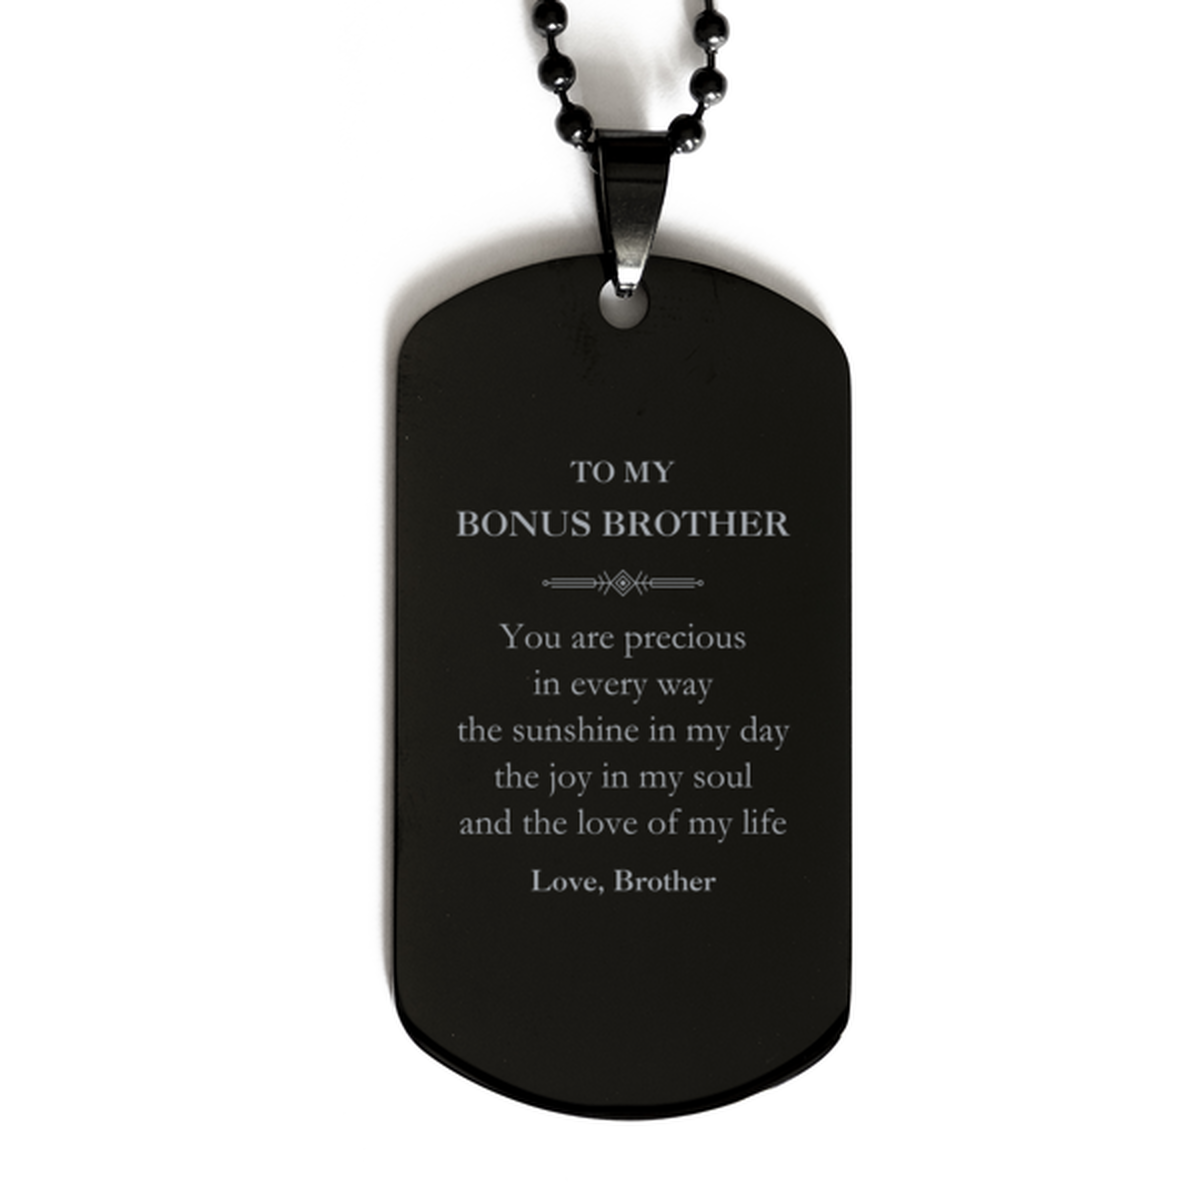 Graduation Gifts for Bonus Brother Black Dog Tag Present from Brother, Christmas Bonus Brother Birthday Gifts Bonus Brother You are precious in every way the sunshine in my day. Love, Brother